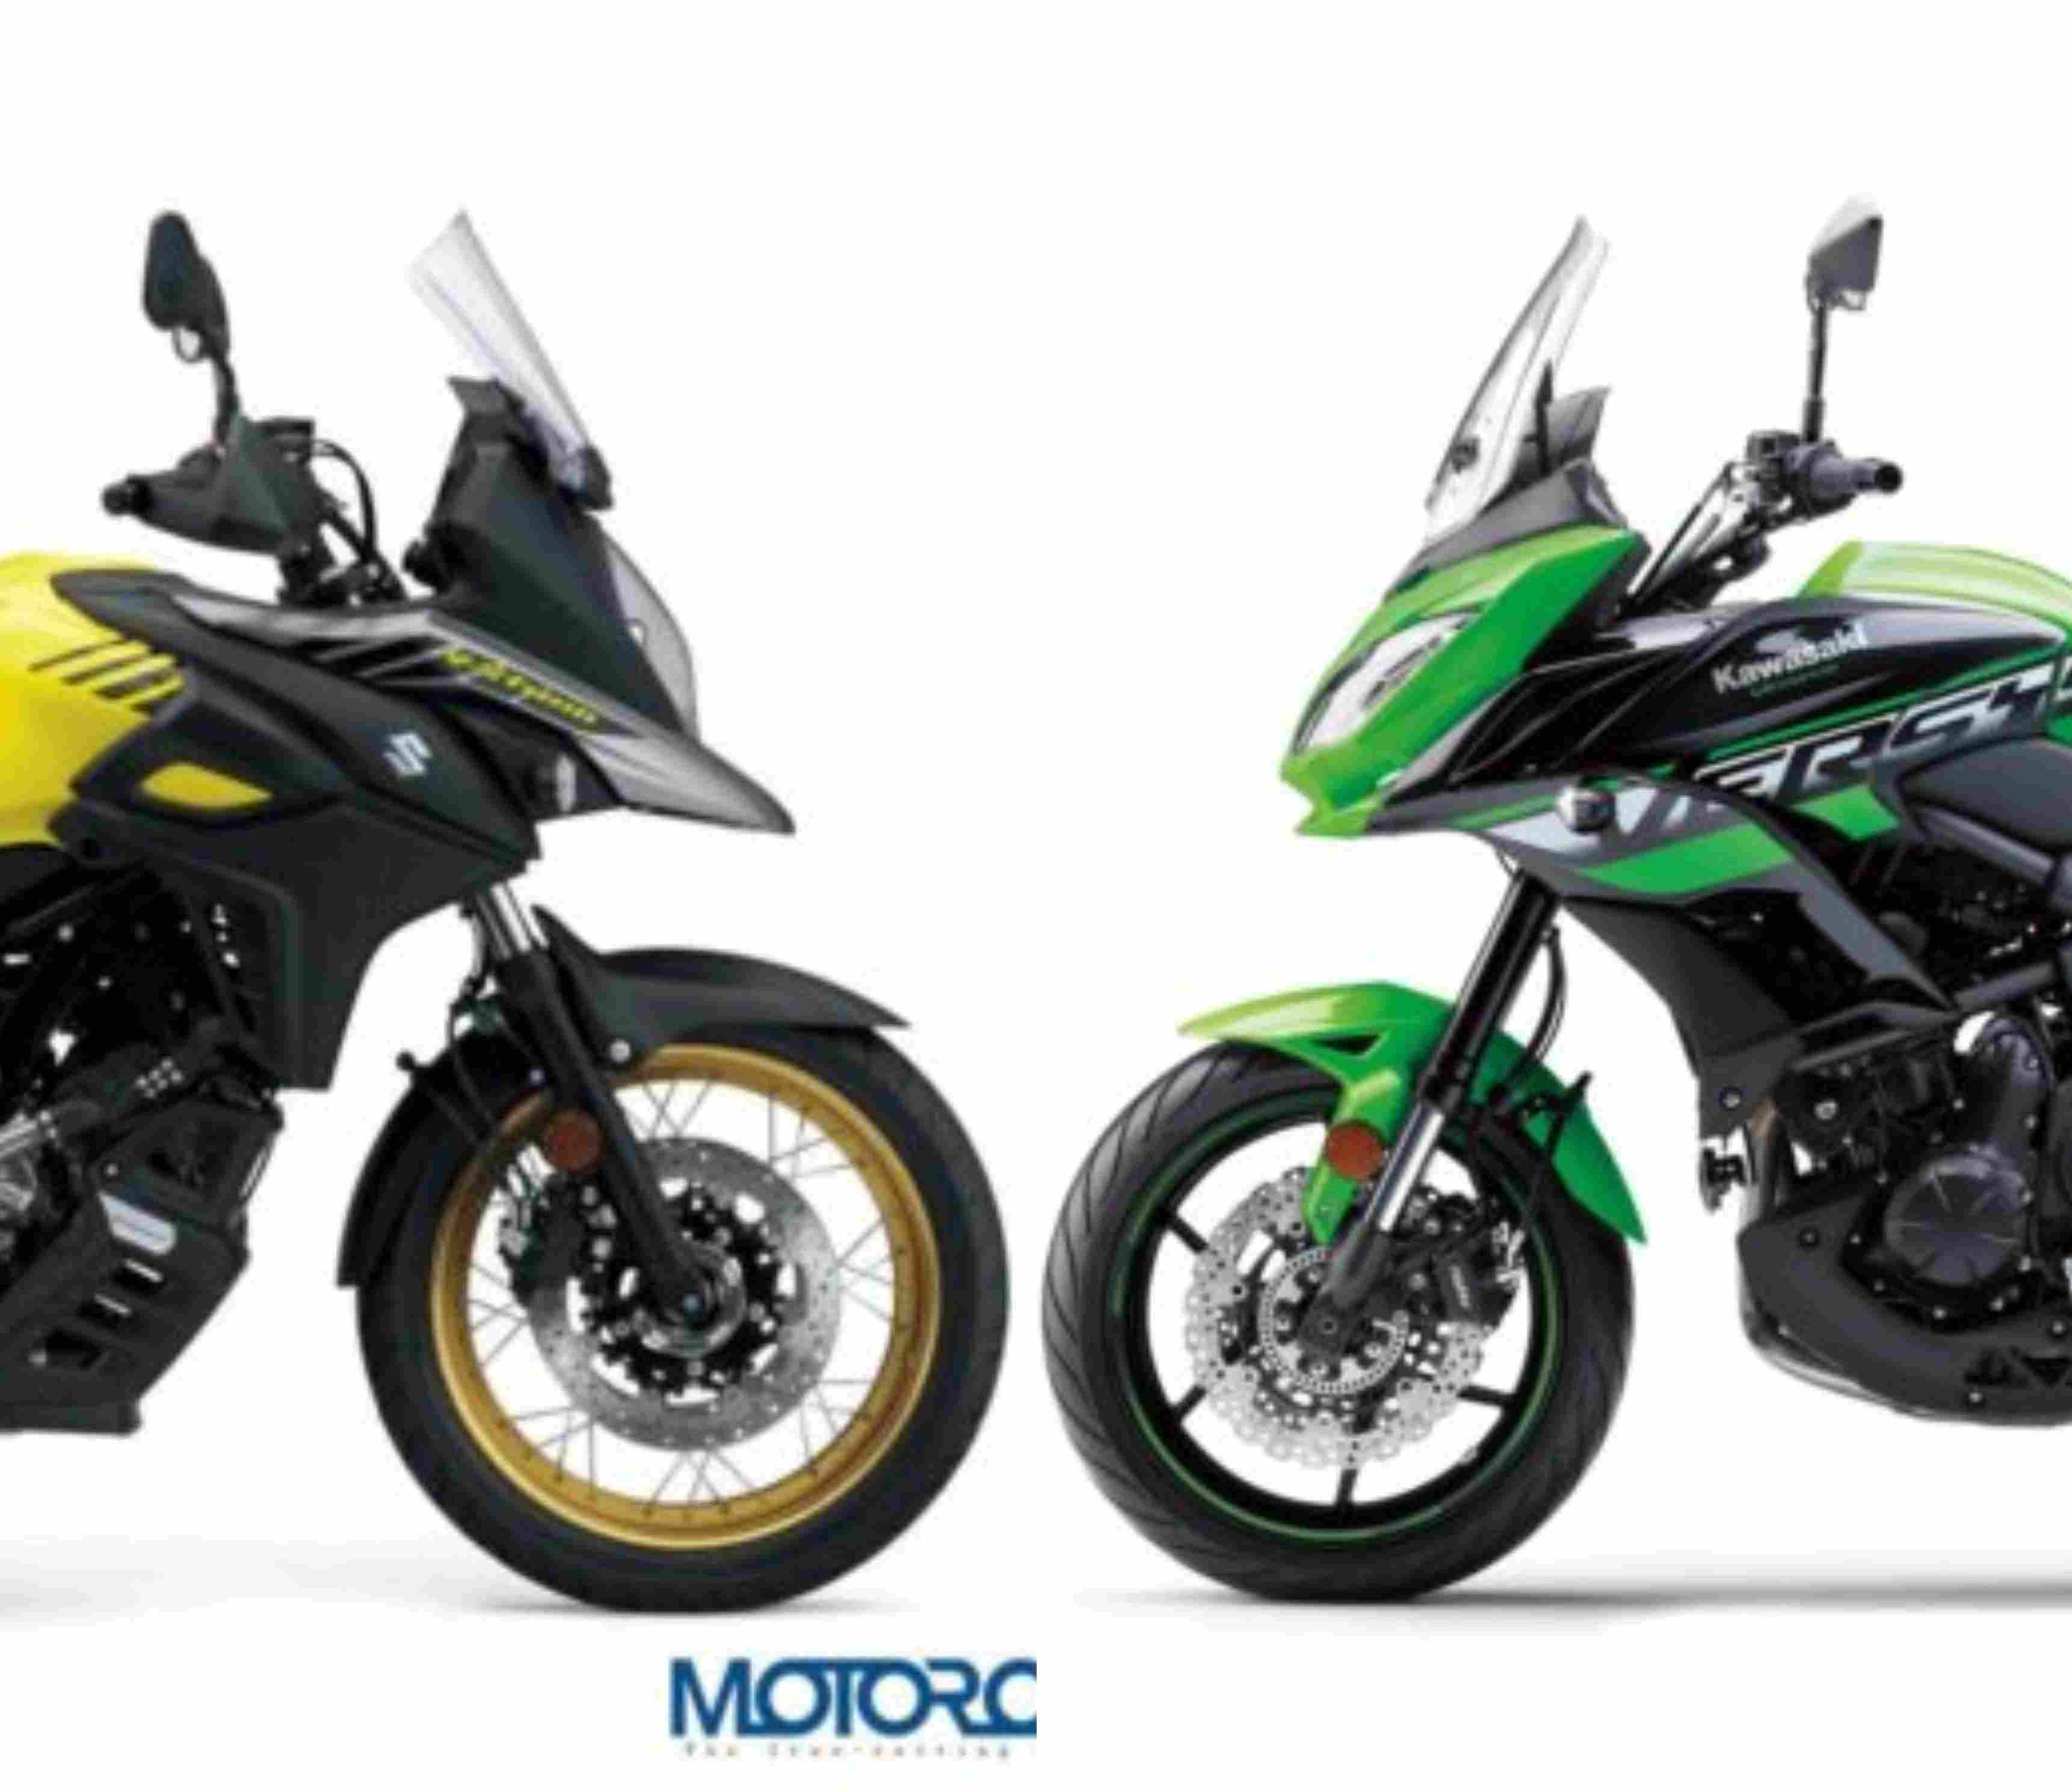 Suzuki V-Strom 650 ABS Vs Kawasaki Versys 650: Which Of These Adventure Touring Machines Is More Value | Motoroids